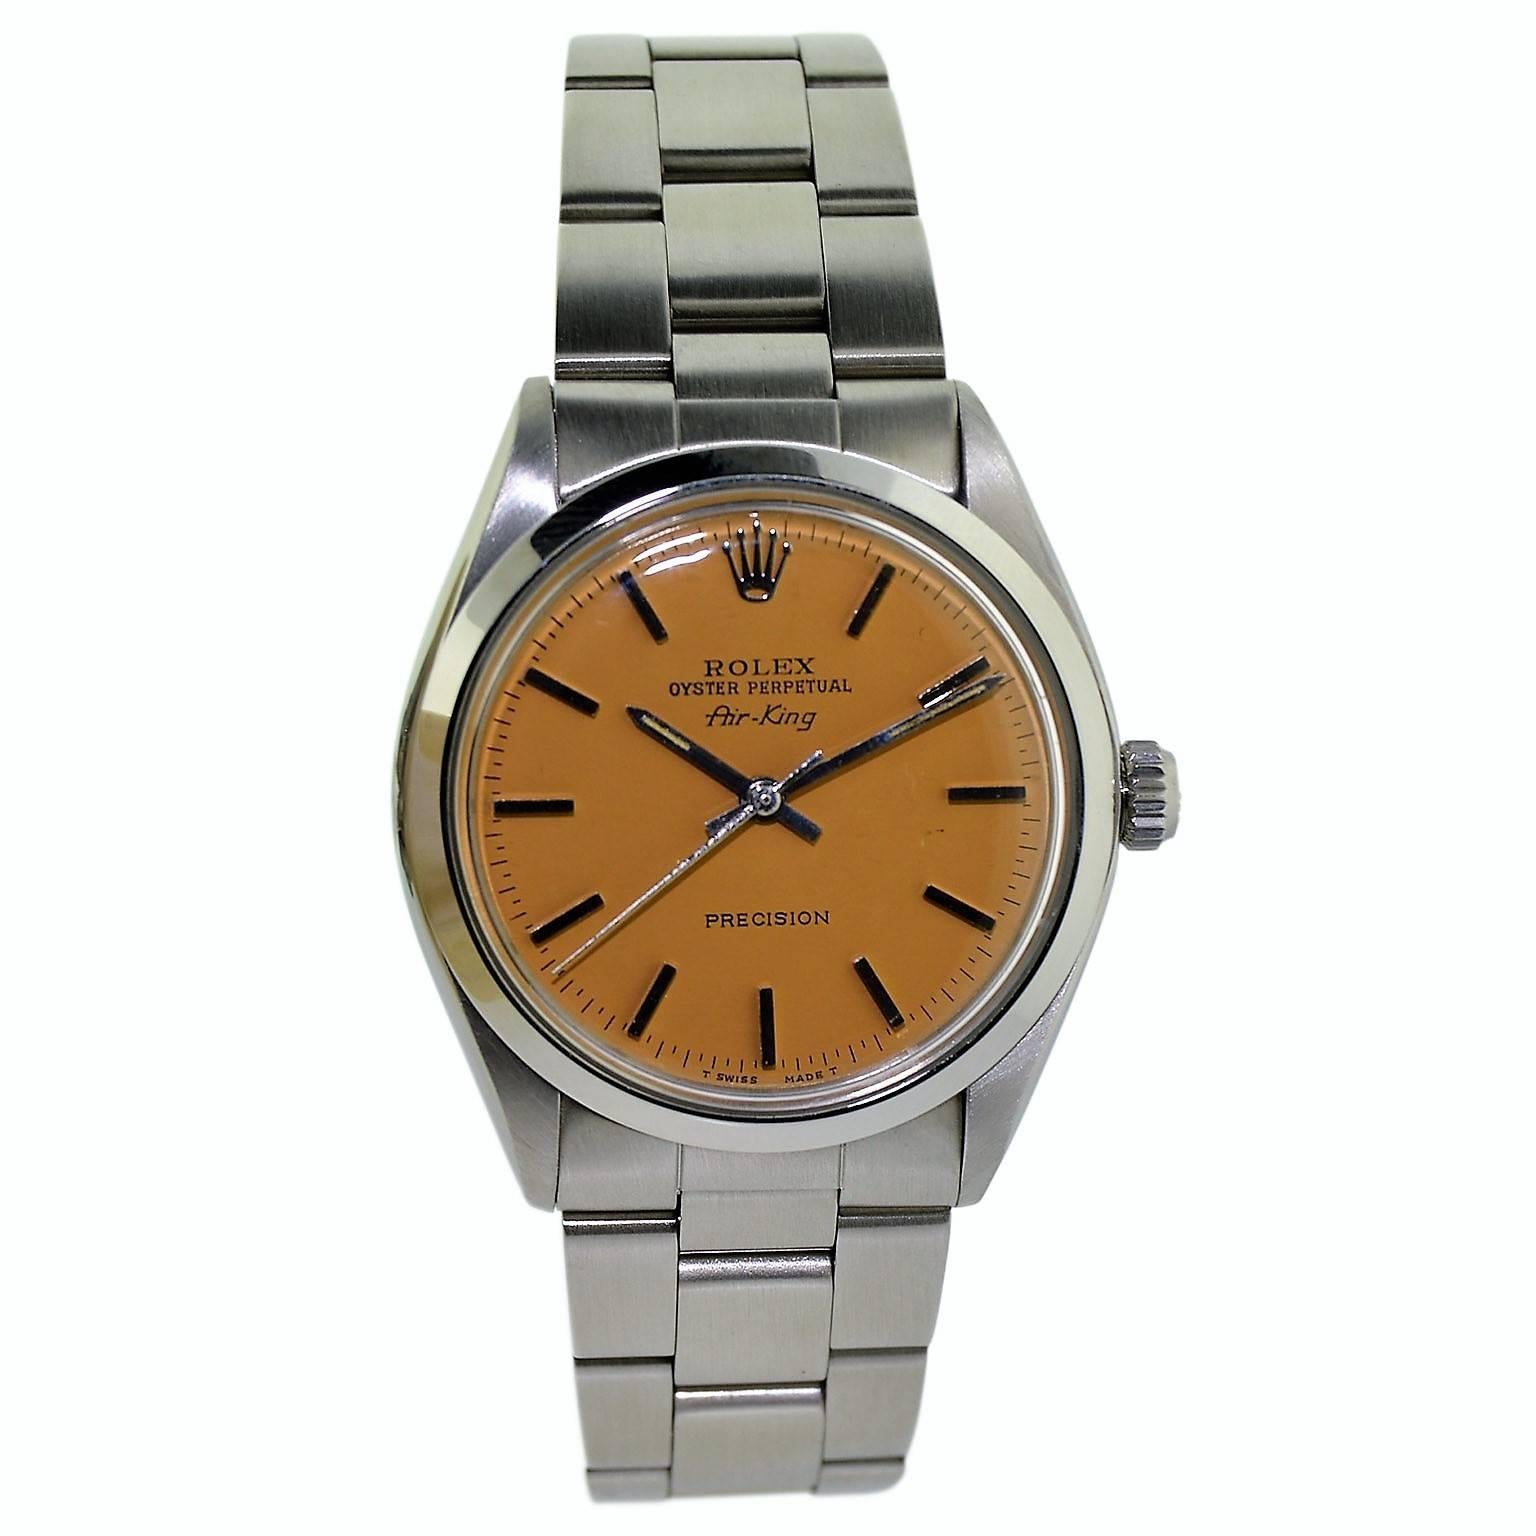 FACTORY / HOUSE: Rolex Watch Comany
STYLE / REFERENCE: Air King / Ref. 5500
METAL / MATERIAL: Stainless Steel 
CIRCA: Mid 1970's
DIMENSIONS: 39mm X 34mm
MOVEMENT / CALIBER: Perpetual Winding / 26 Jewels / Cal. 1520
DIAL / HANDS: Custom Burnt Orange